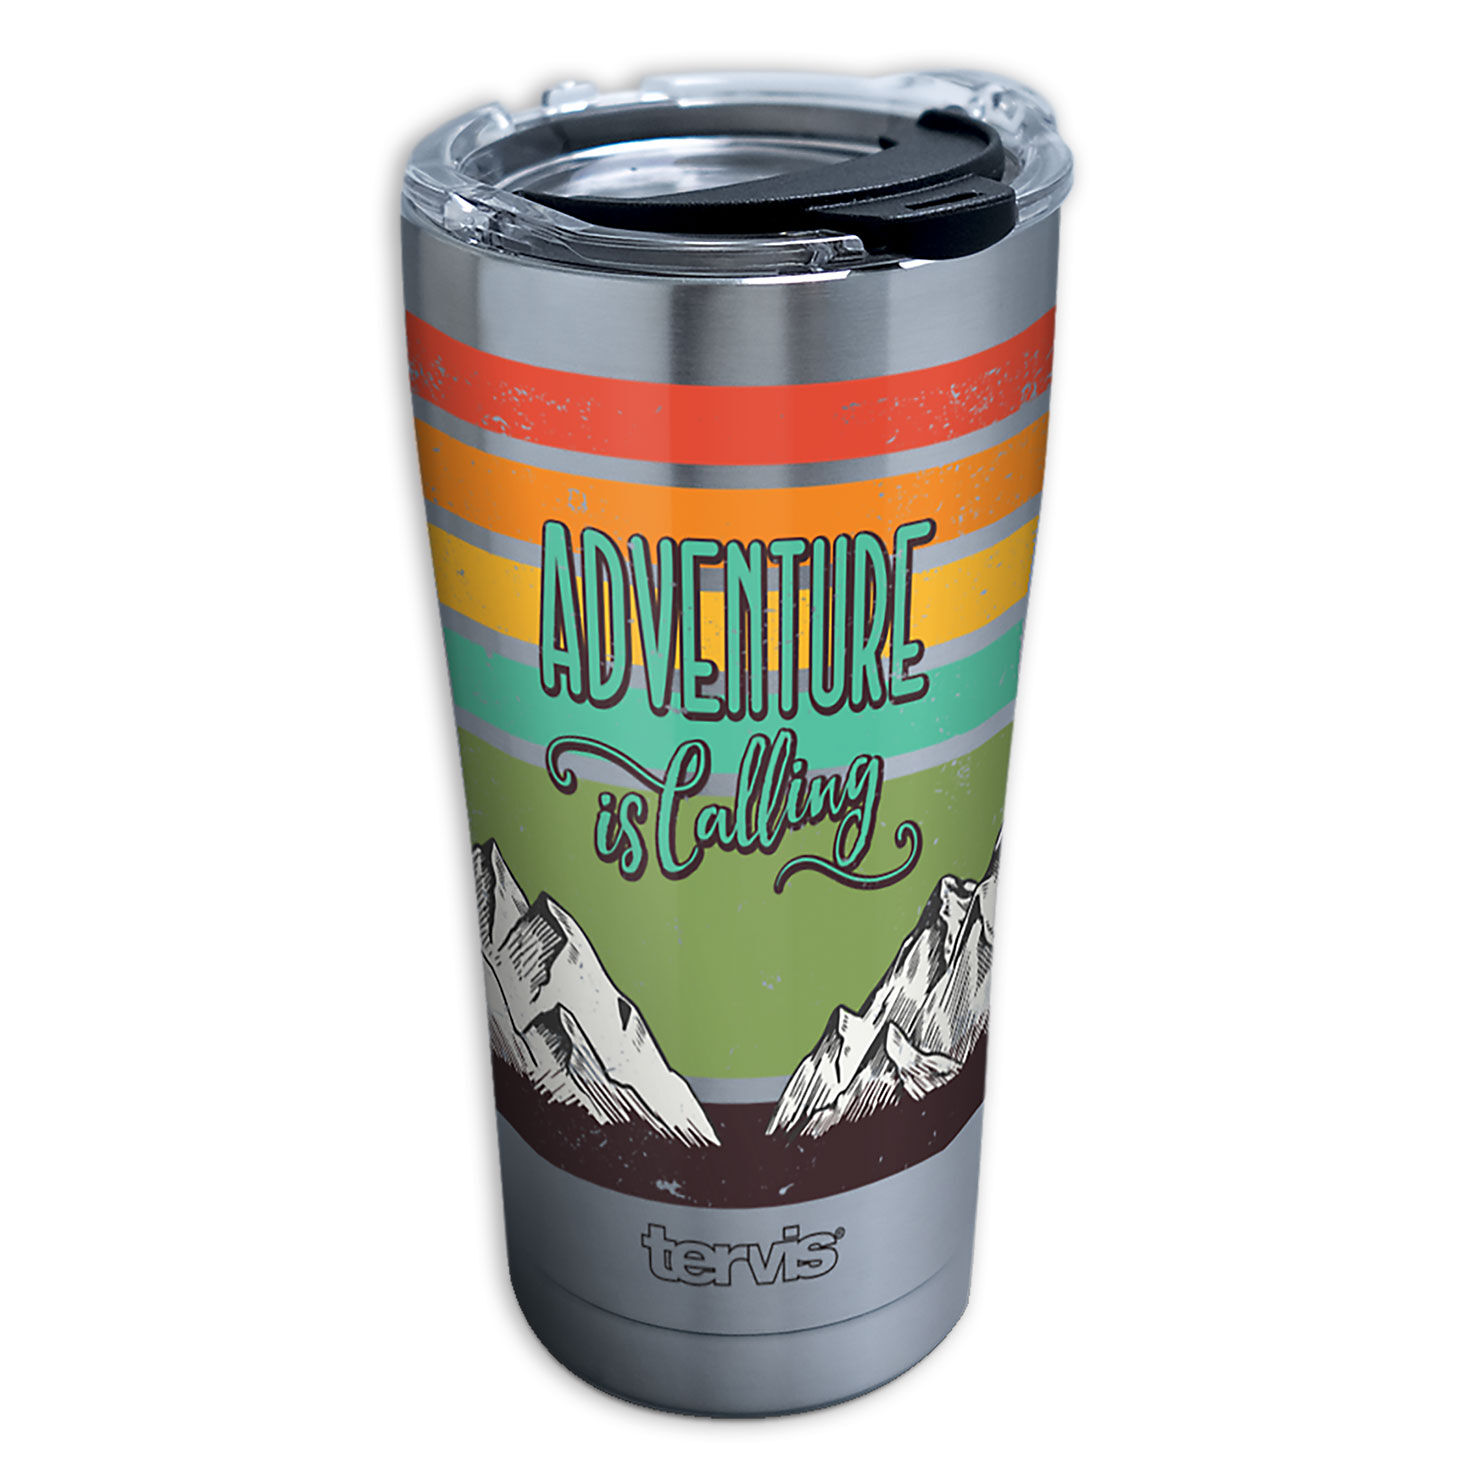 Tervis Adventure Is Calling Made in USA Double Walled Insulated Tumbler Travel Cup Keeps Drinks Cold & Hot, 24oz, Classic